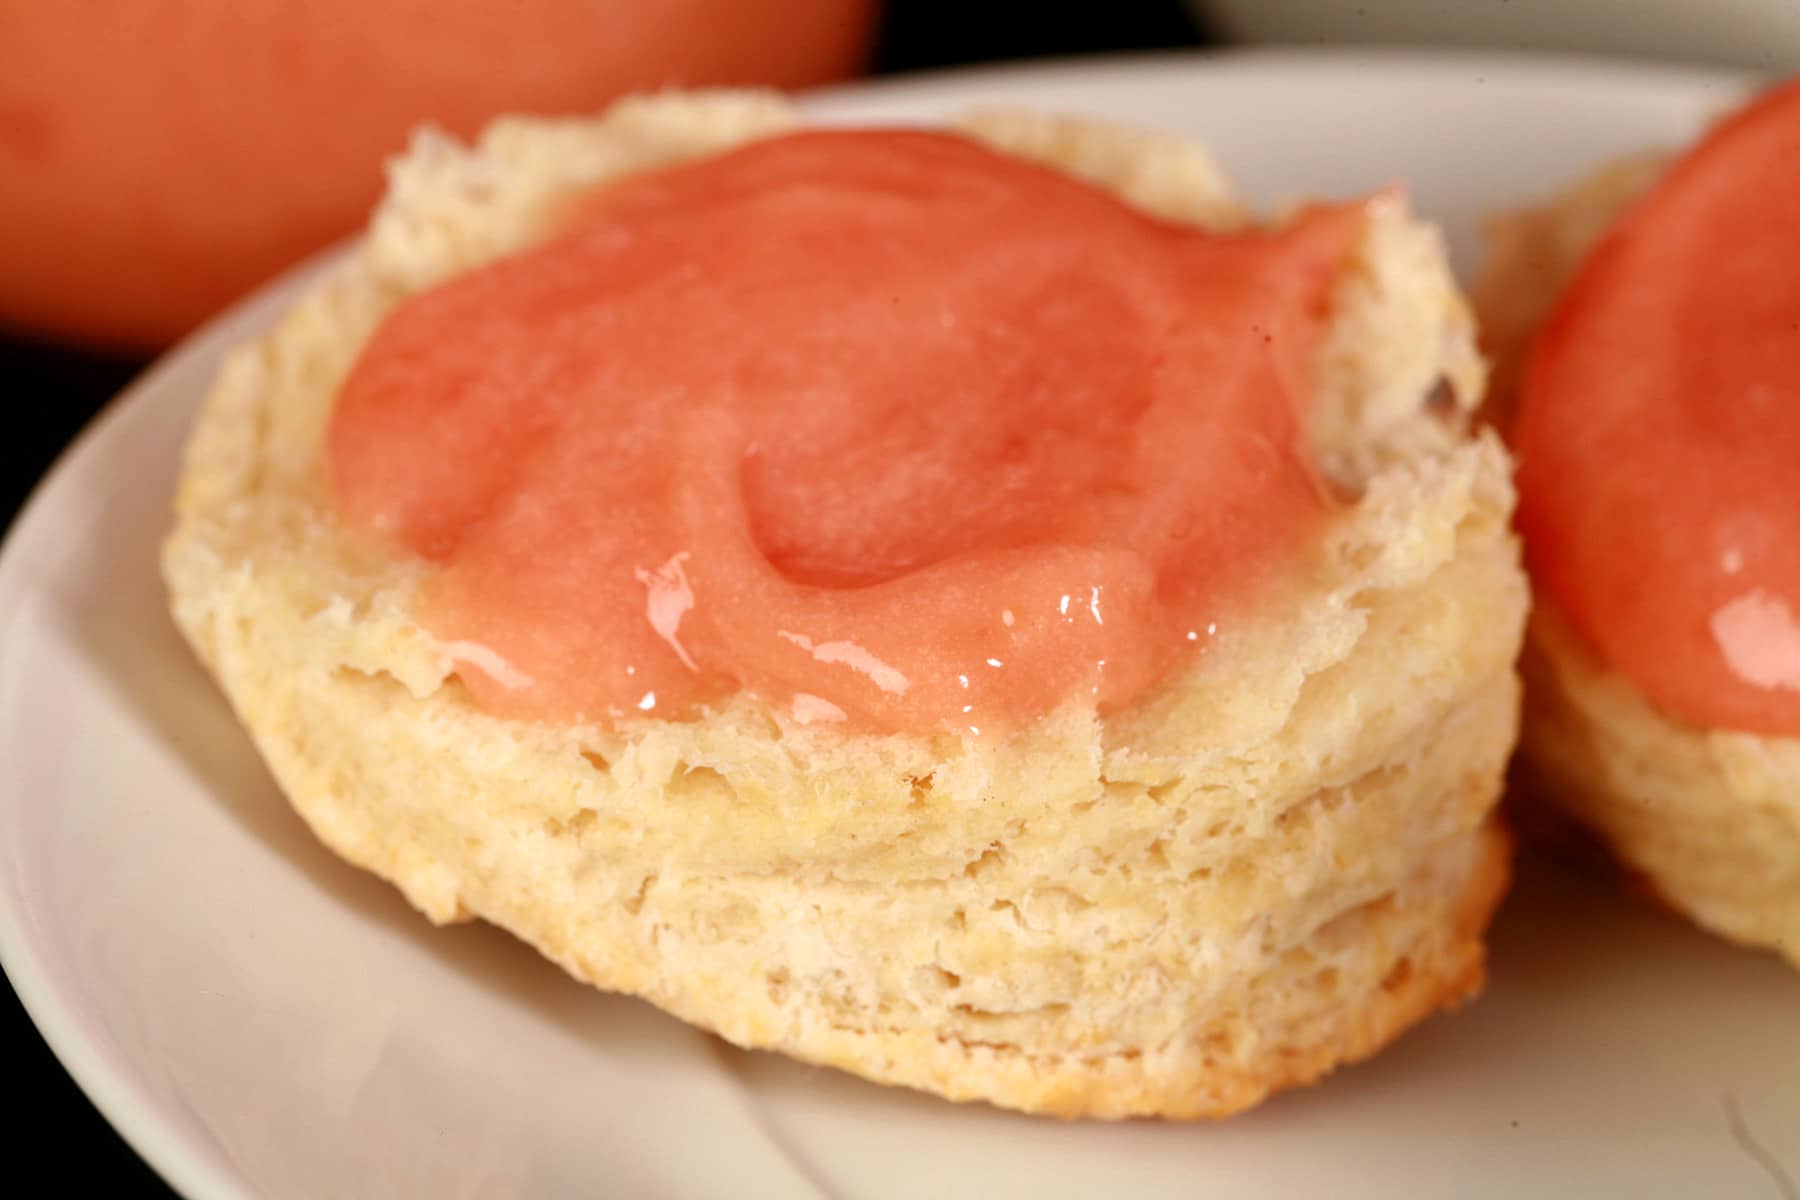 A raspberry curd covered biscuit on a plate, along with a spoon of the pink curd.